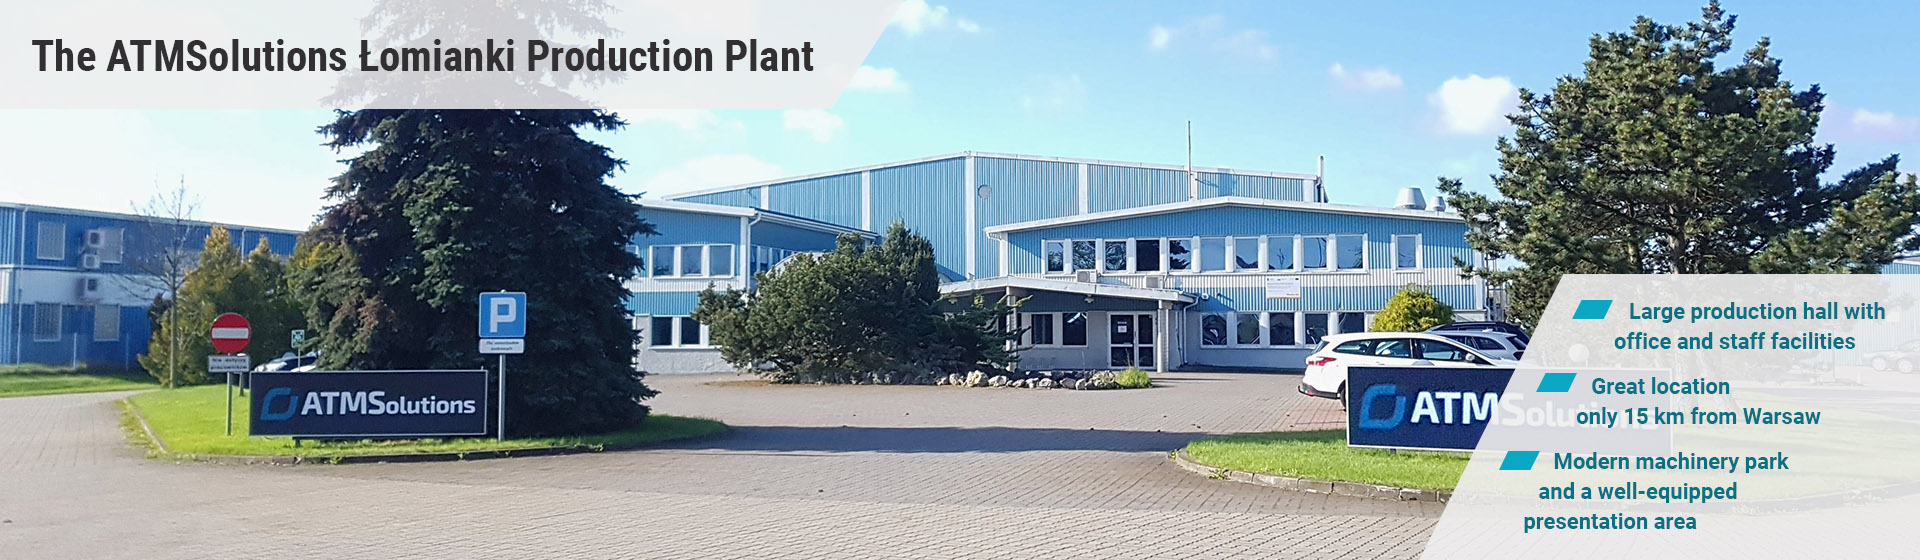 ATMSolutions Łomianki production plant